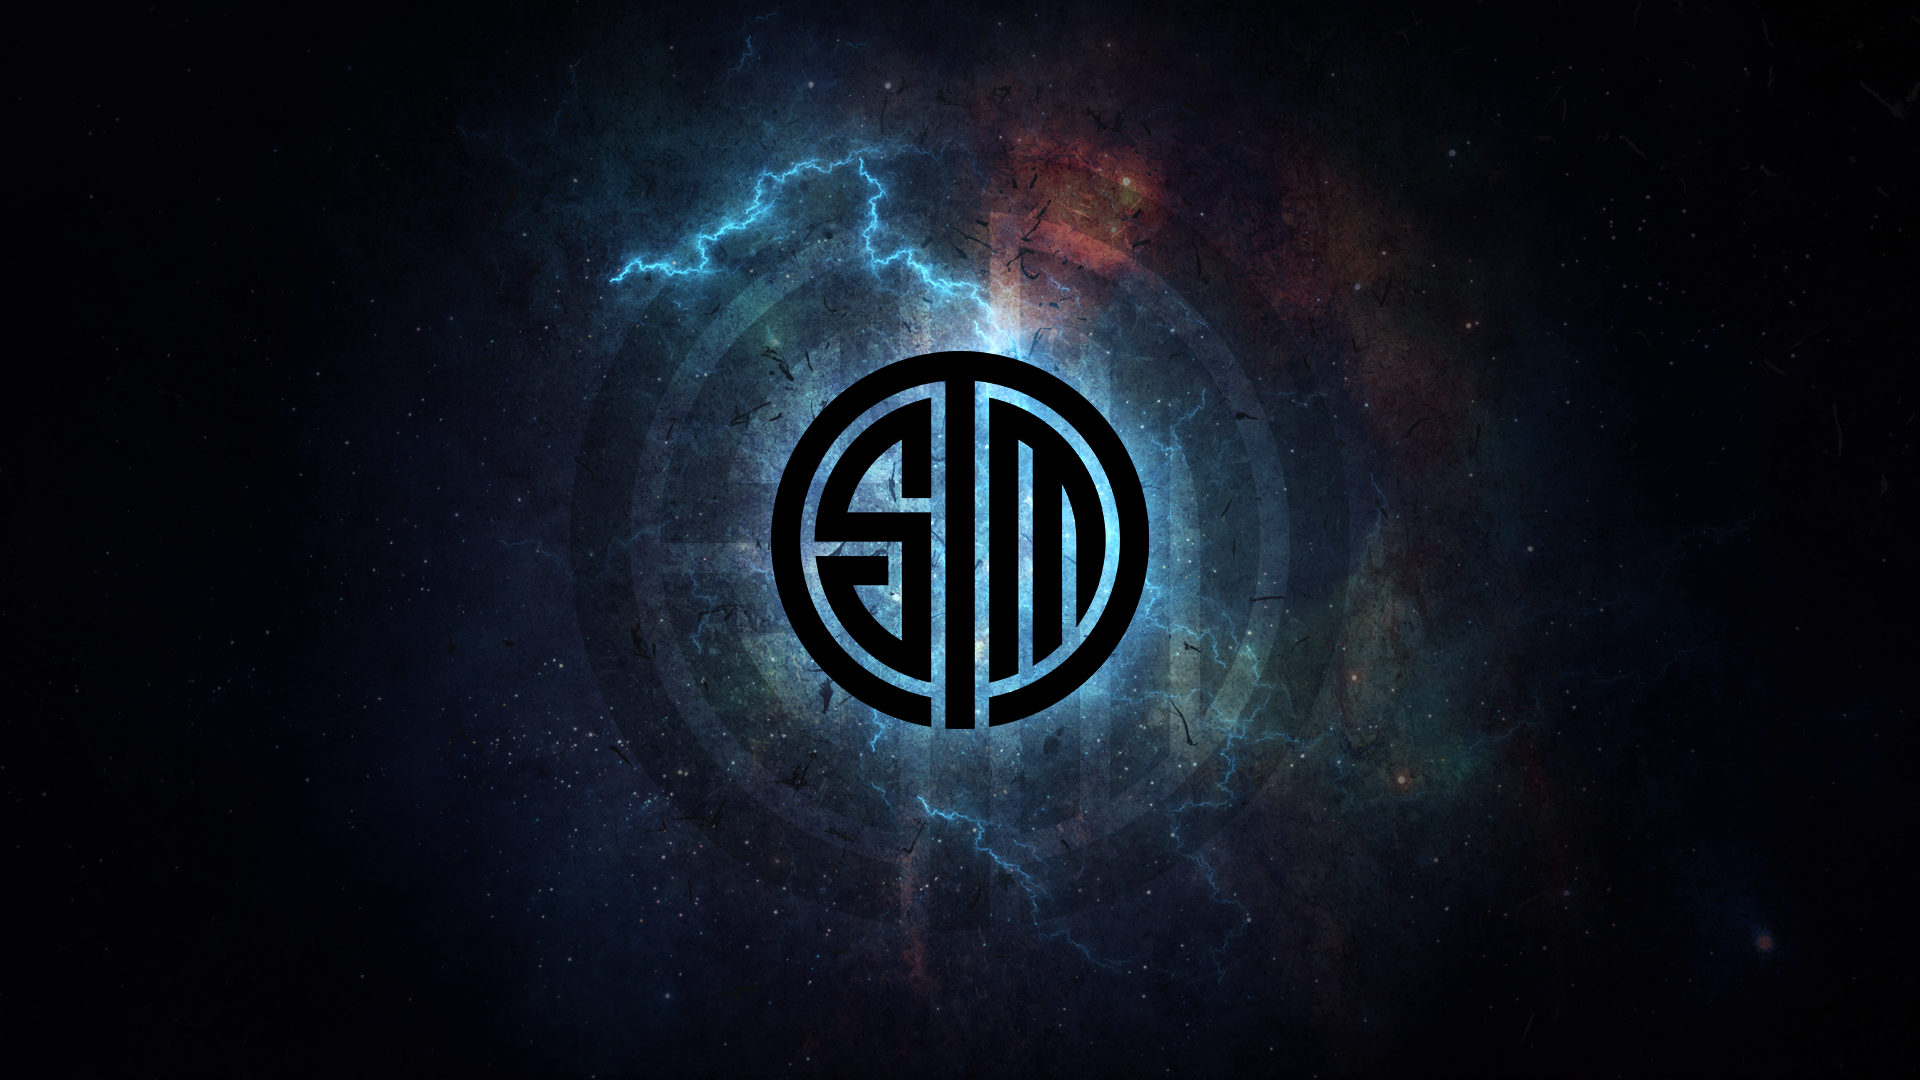 File:Team SoloMid logo.png - Wikimedia Commons